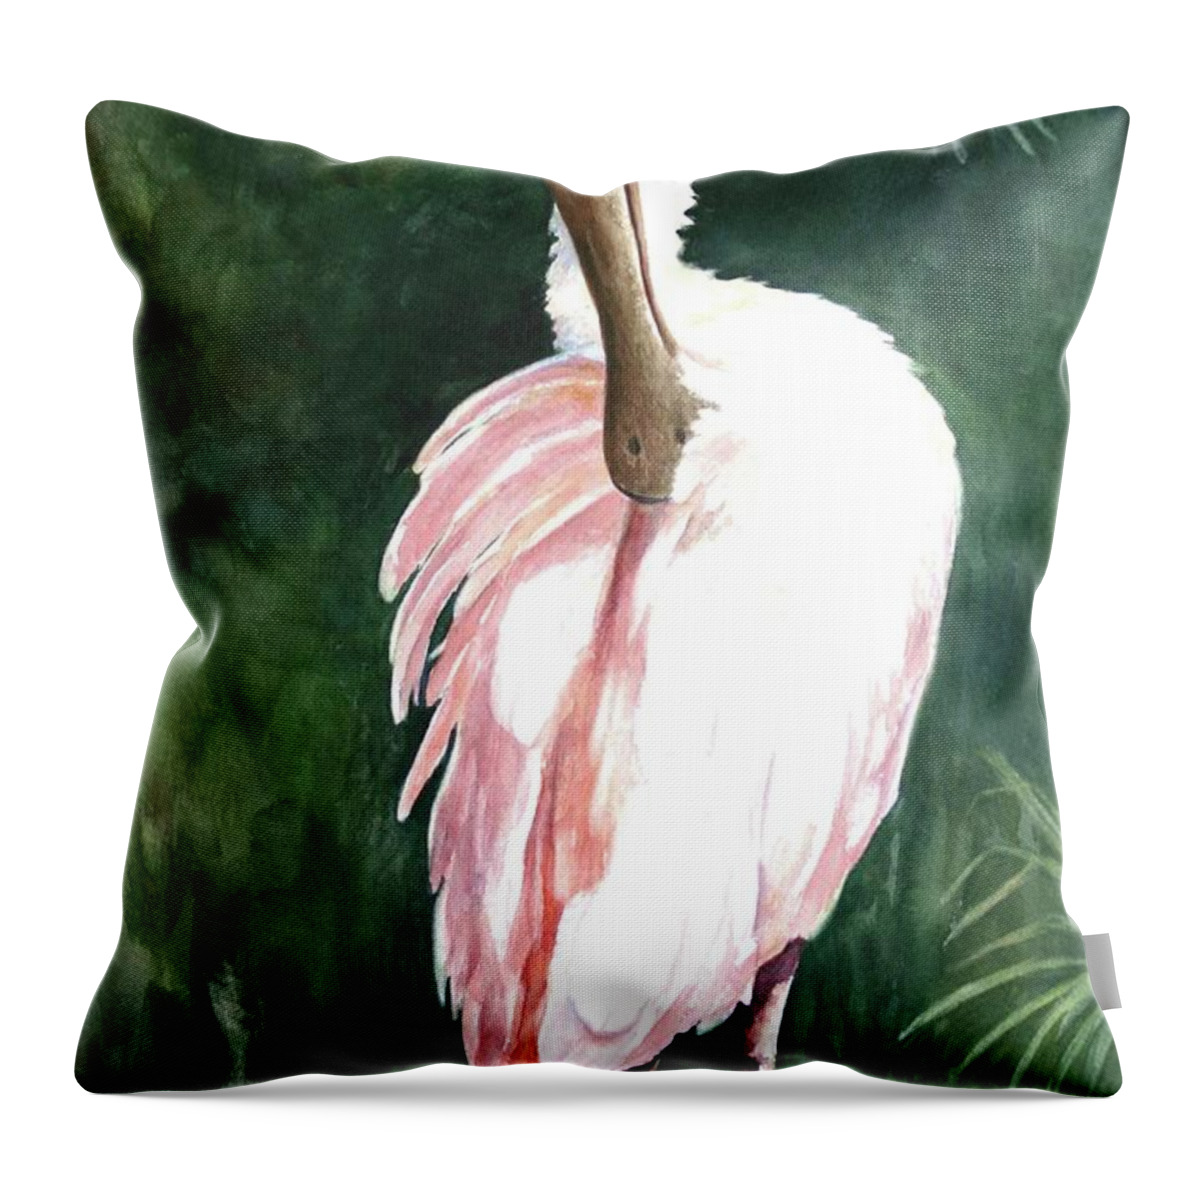 Spoonbill Throw Pillow featuring the painting Look'n Back - Spoonbill by Roxanne Tobaison